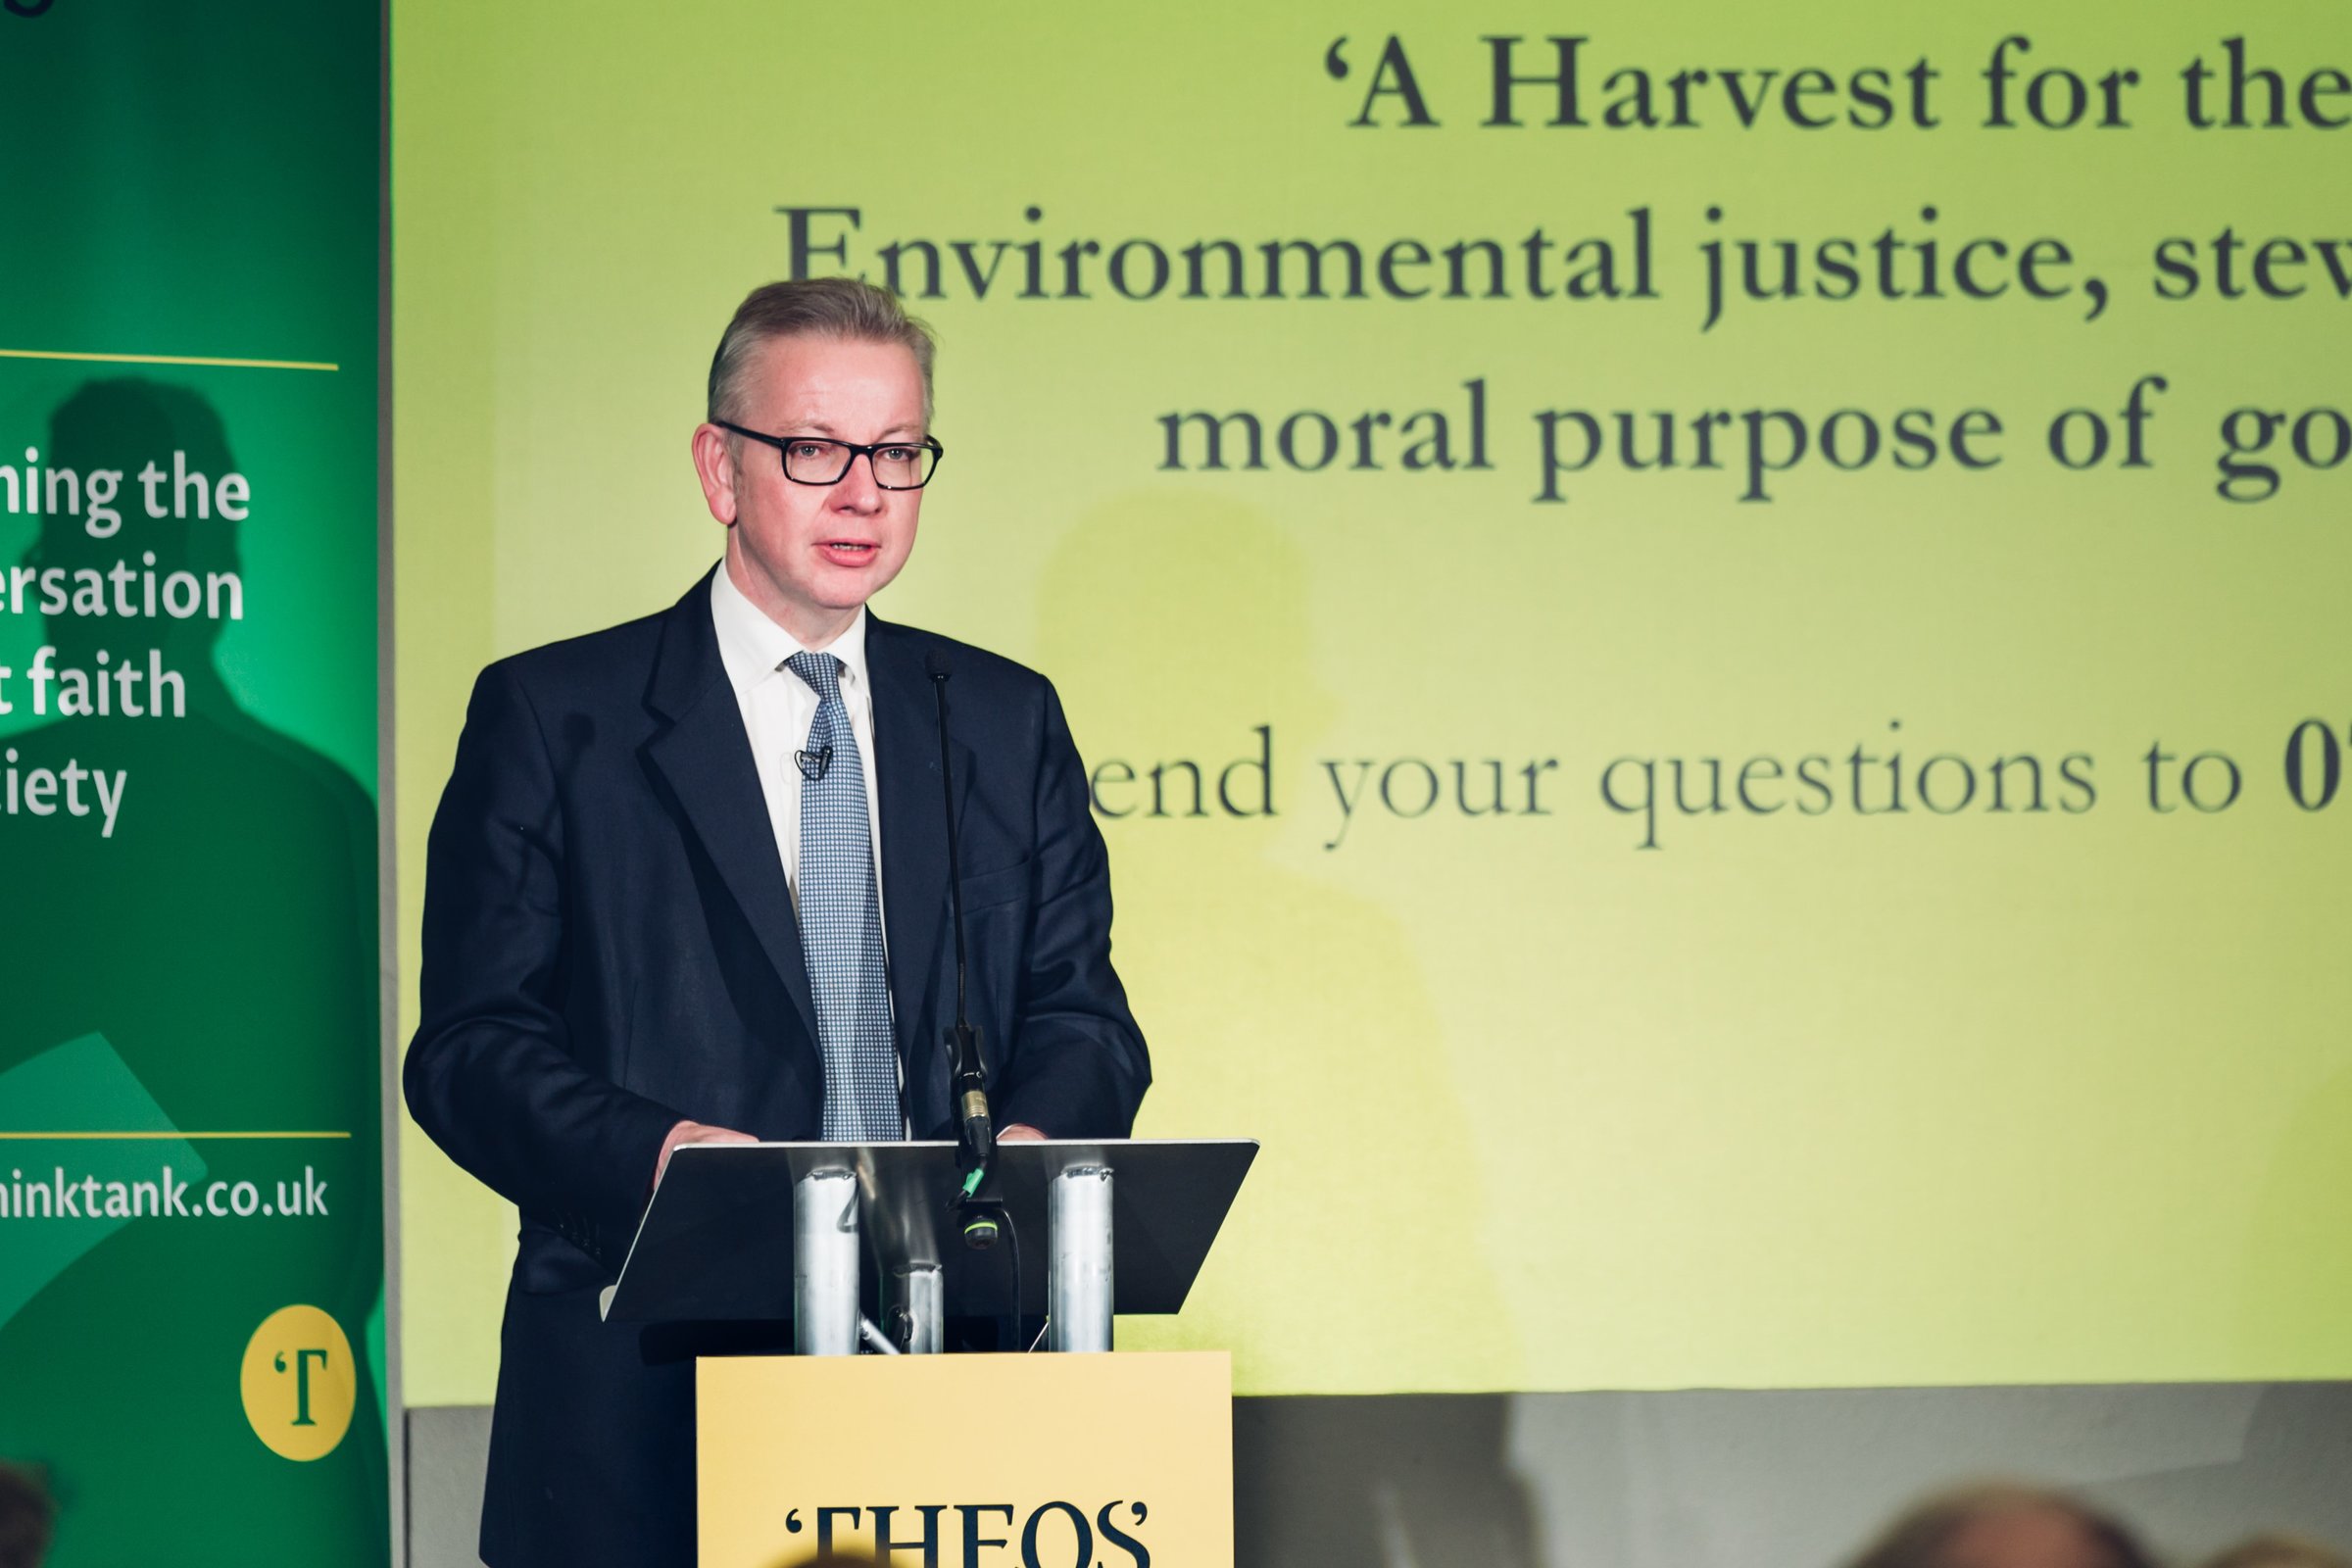 Michael Gove: When will there be a harvest for the world? 